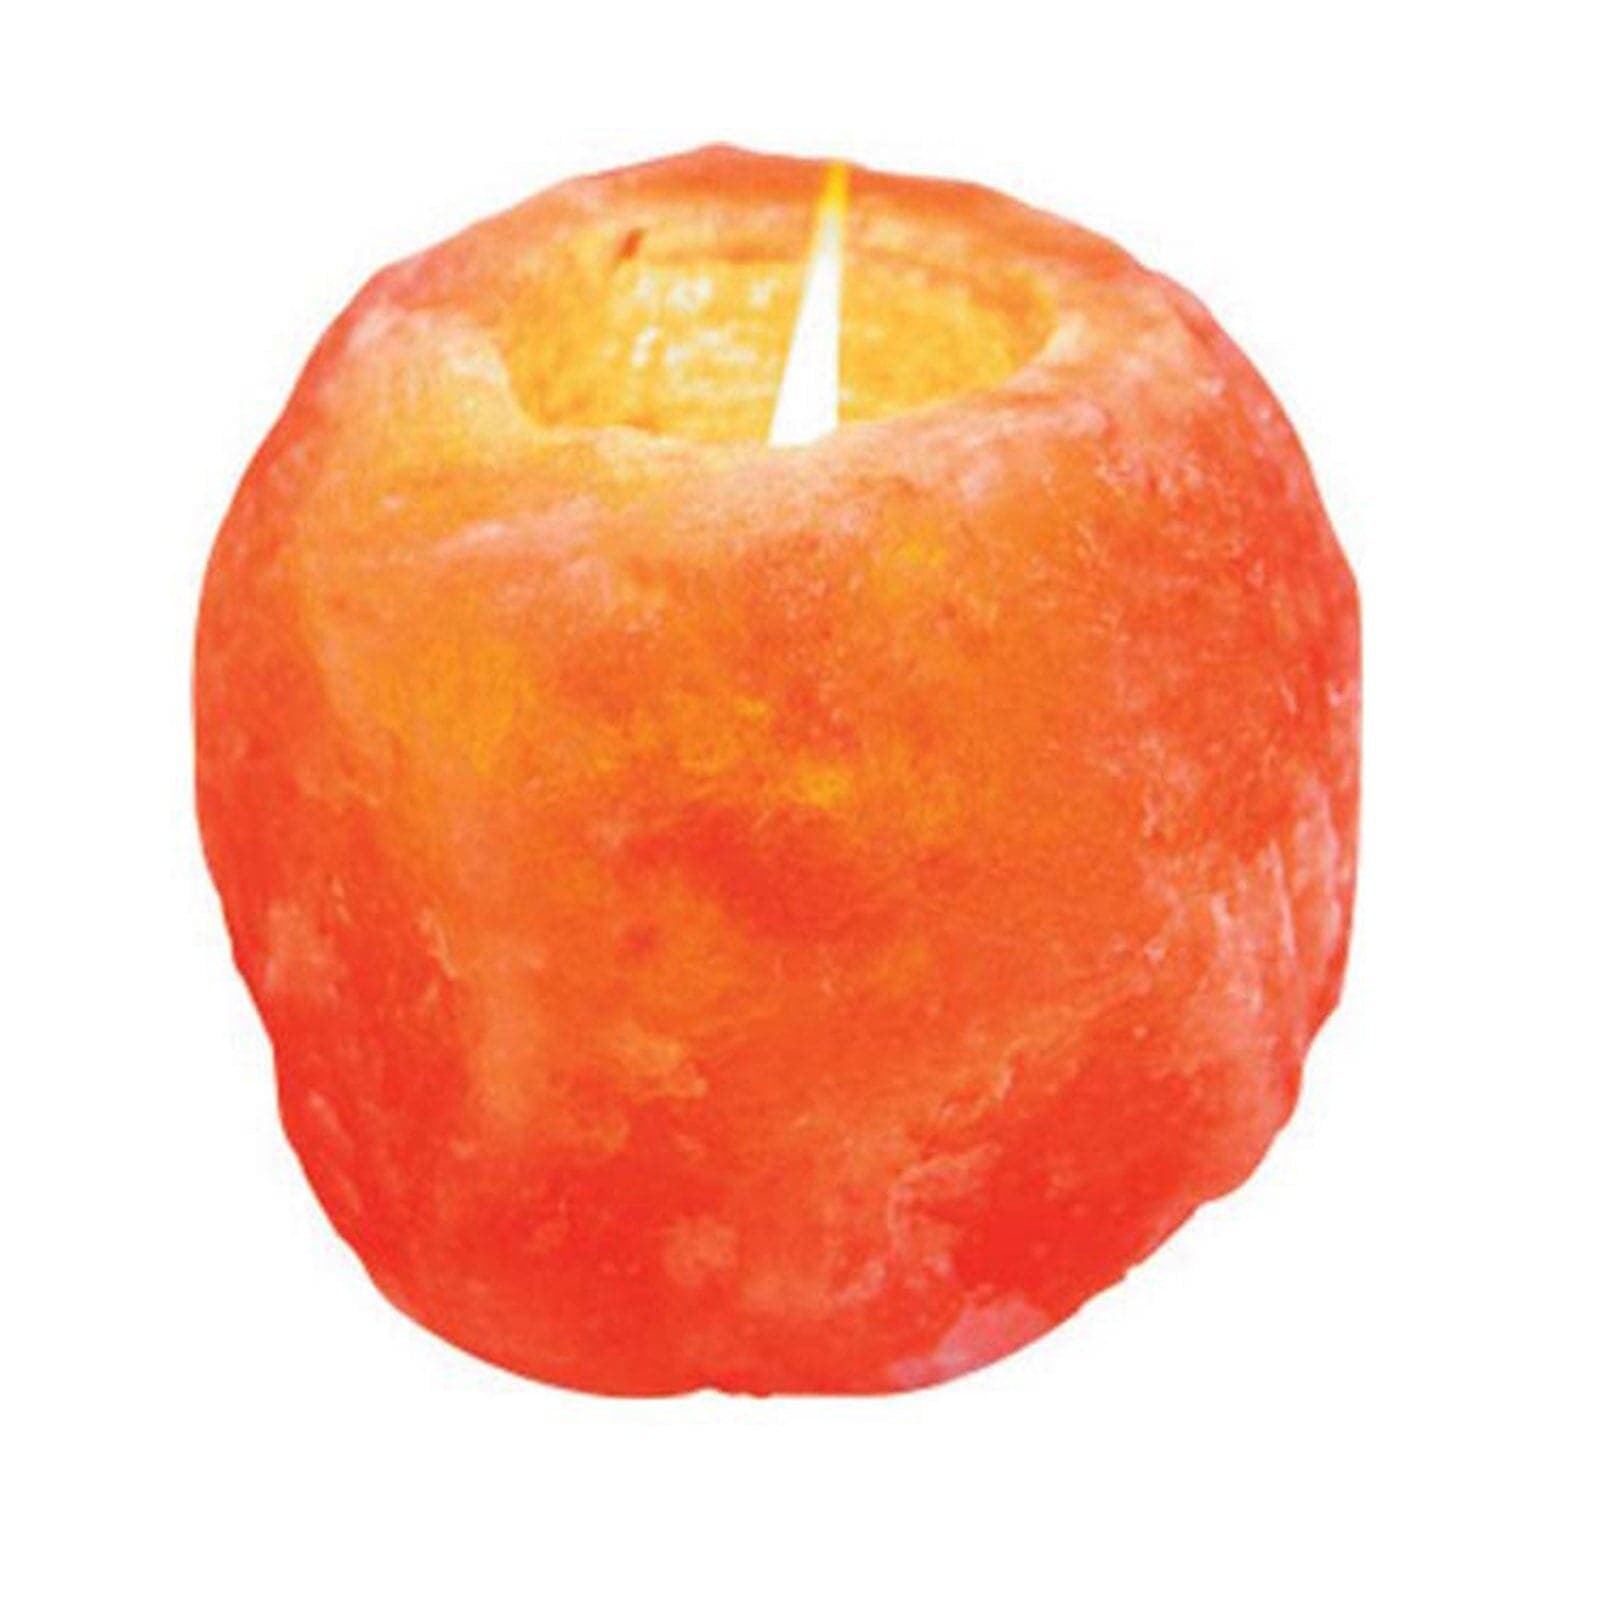 himalayan salt crystal candle online for sale - PapaLiving